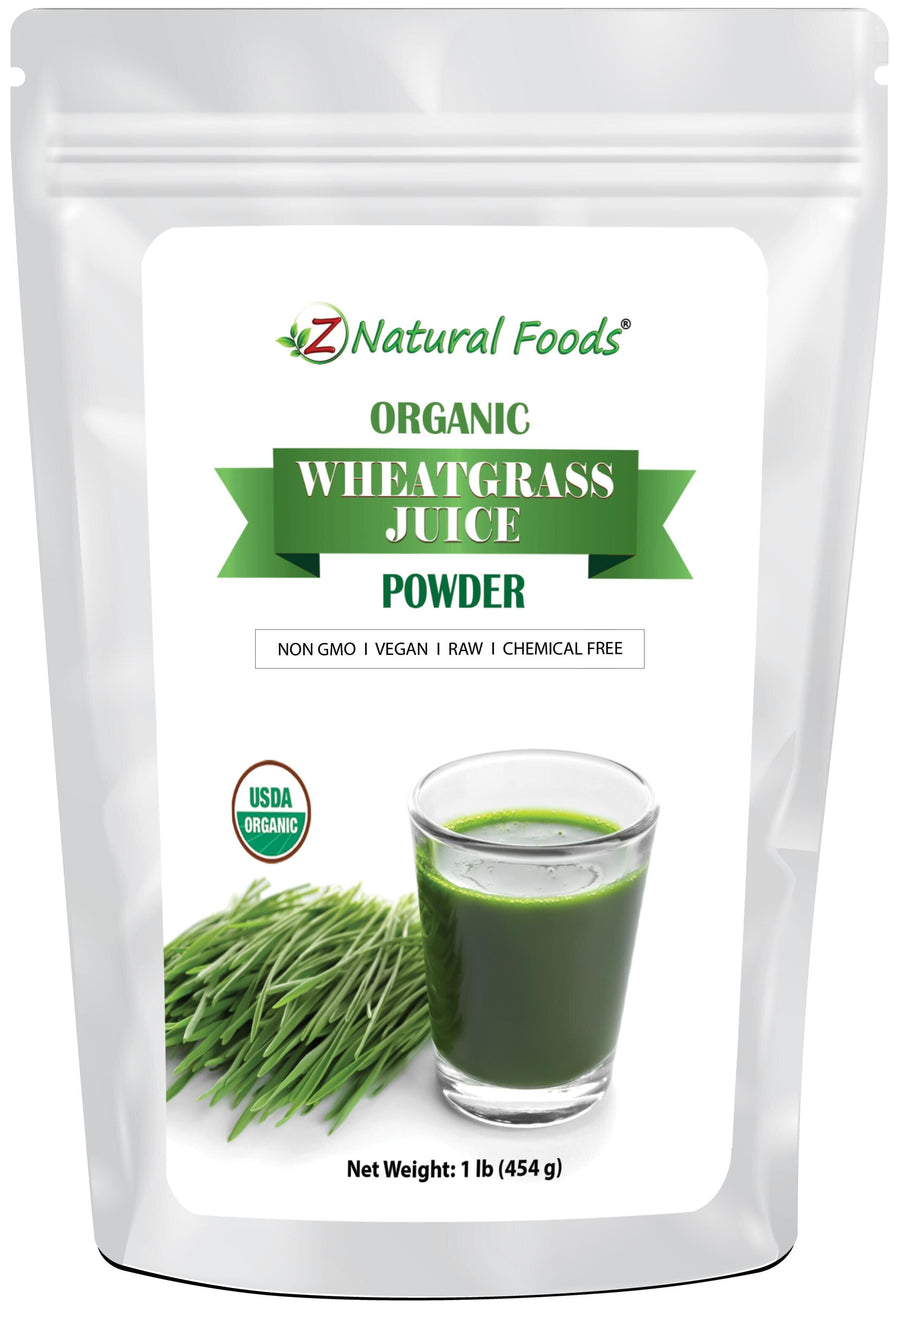 Wheatgrass Juice Powder - Organic front of the bag image Z Natural Foods 1 lb 